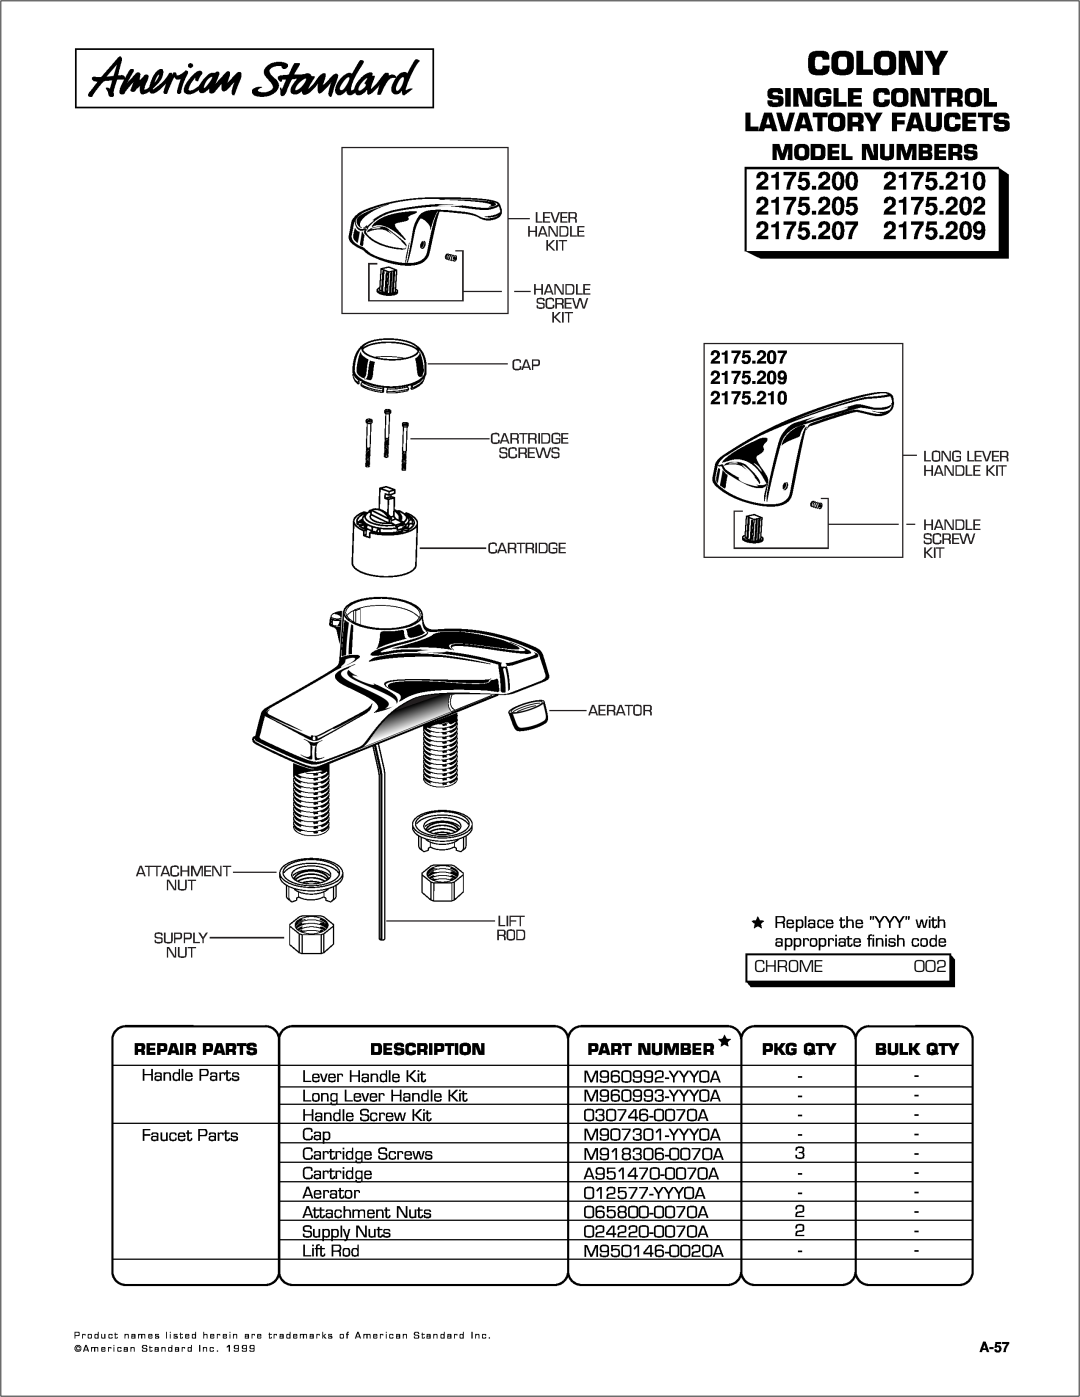 American Standard 2175.202 manual Colony, Single Control, Lavatory Faucets, 2175.210, 2175.209, 2175.200, 2175.205 